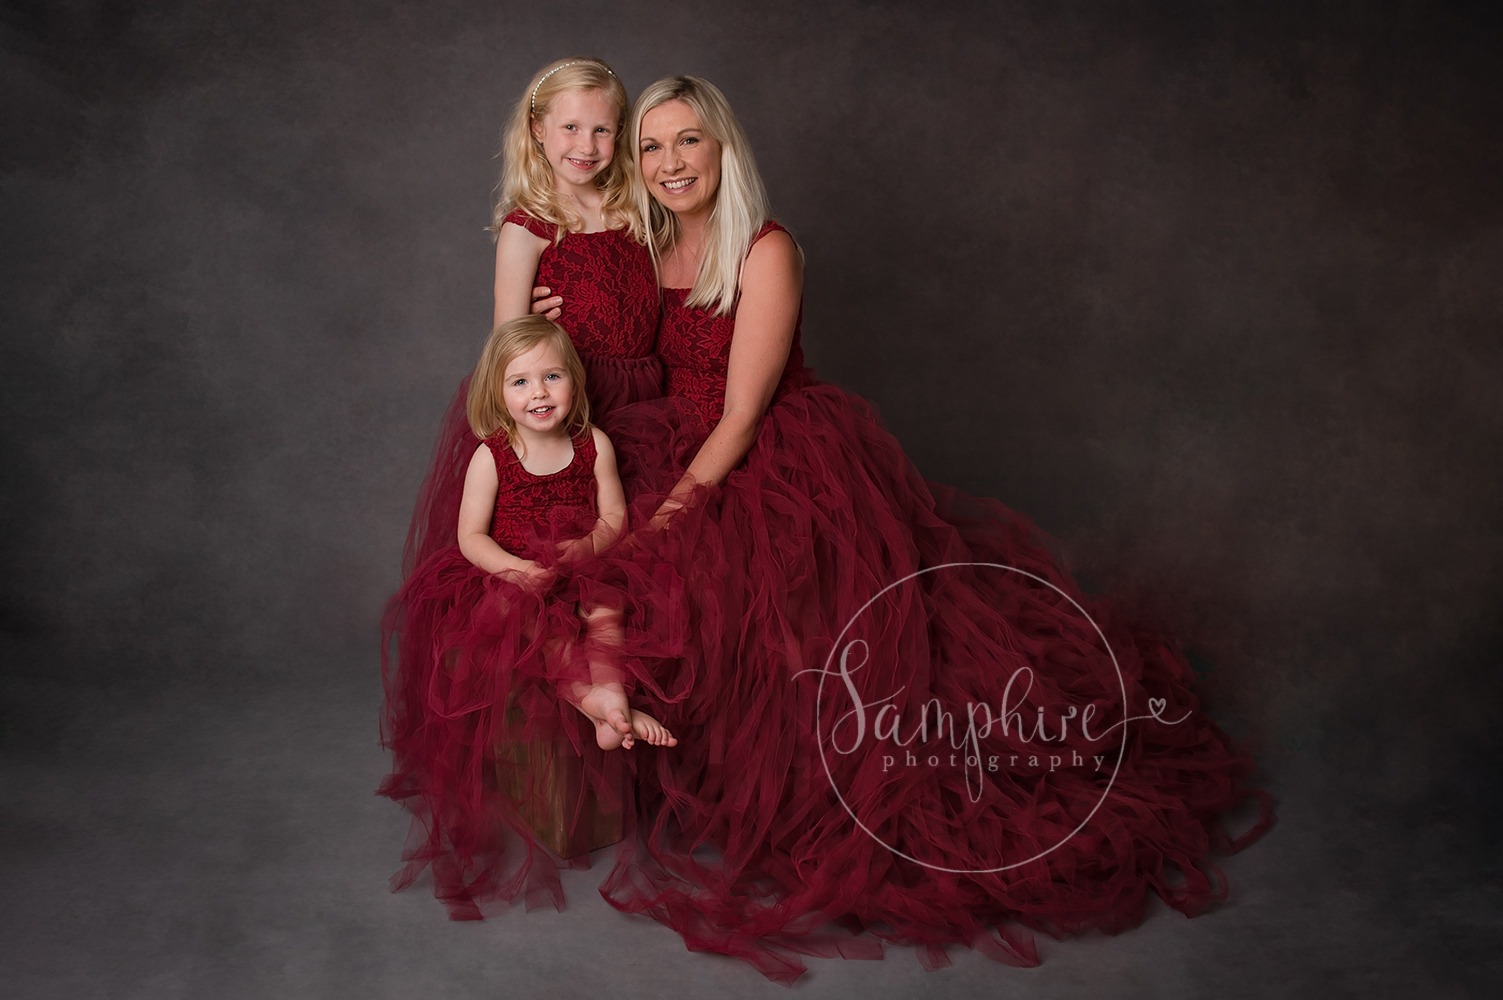 Family group of mum and her daughter taken by horsham photographer Samphire Photography